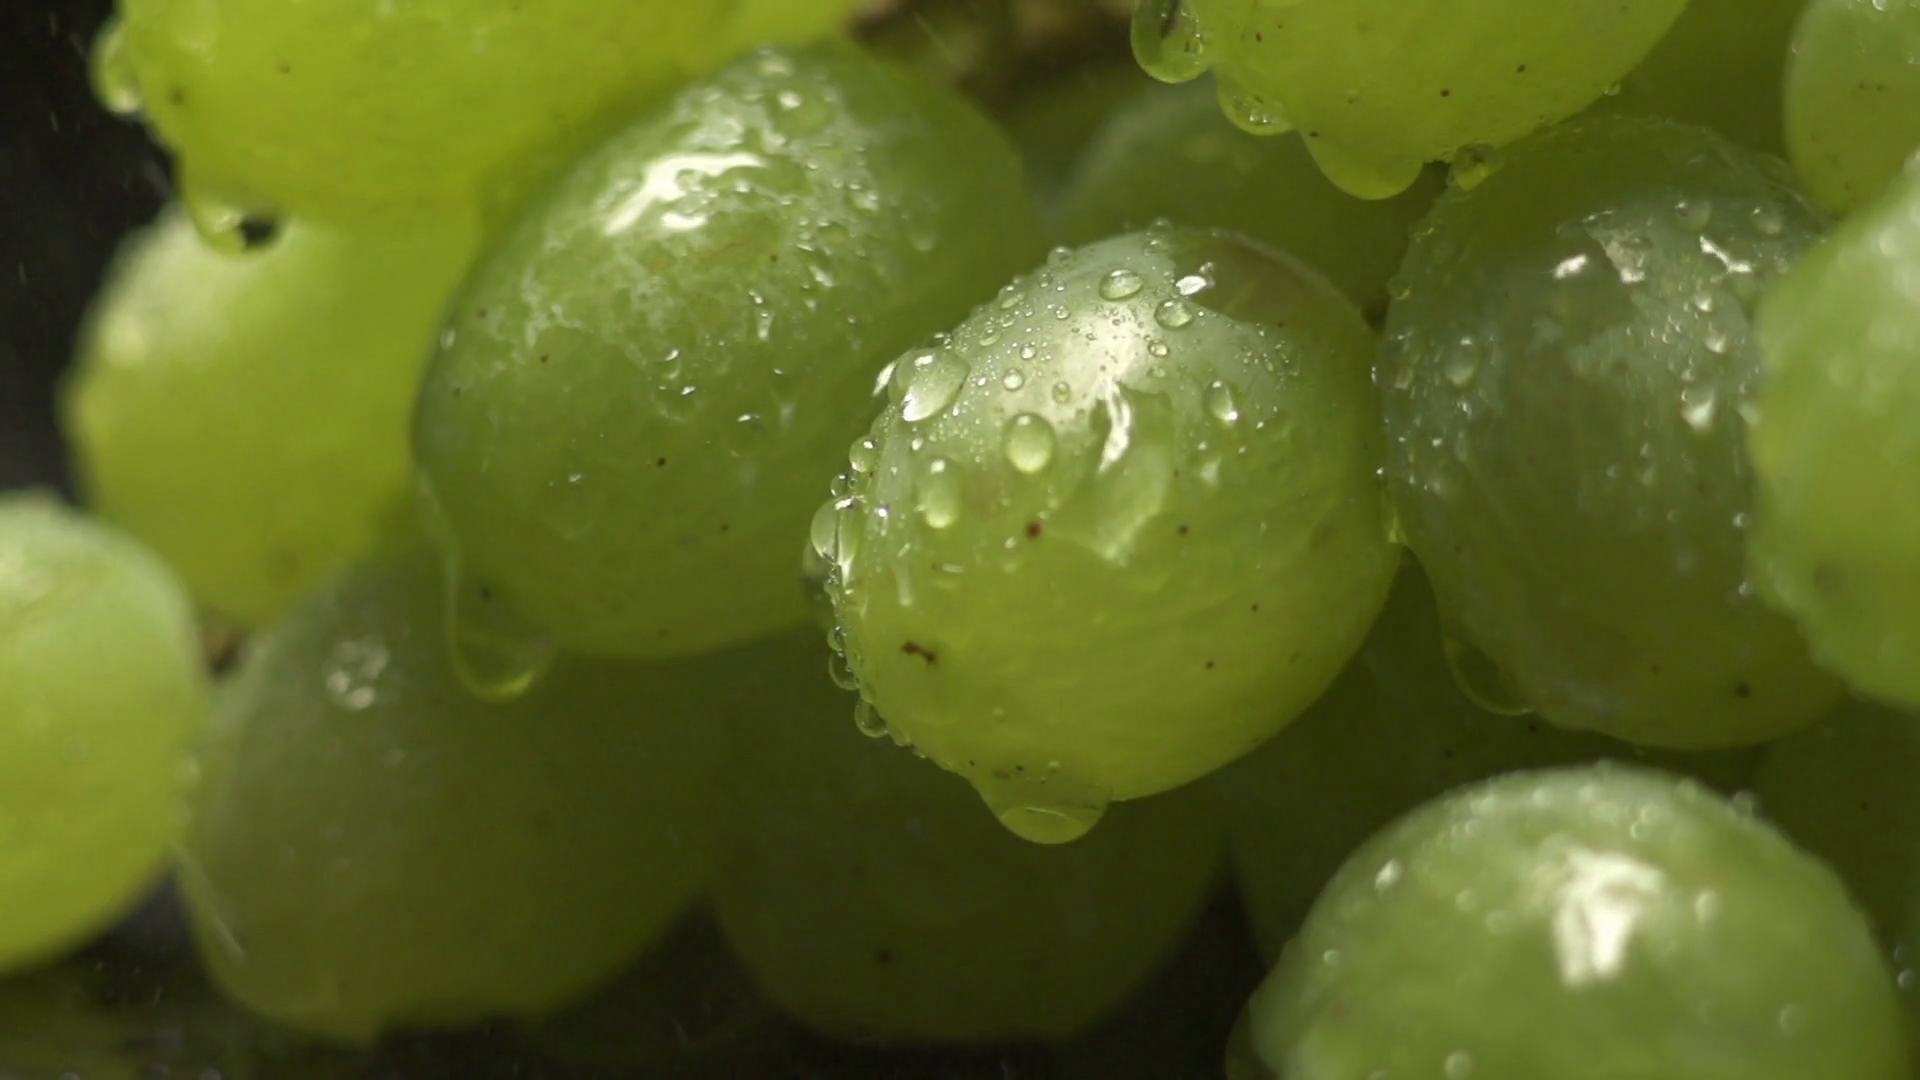 bunch of green grapes on a black background with water drops. HD ...